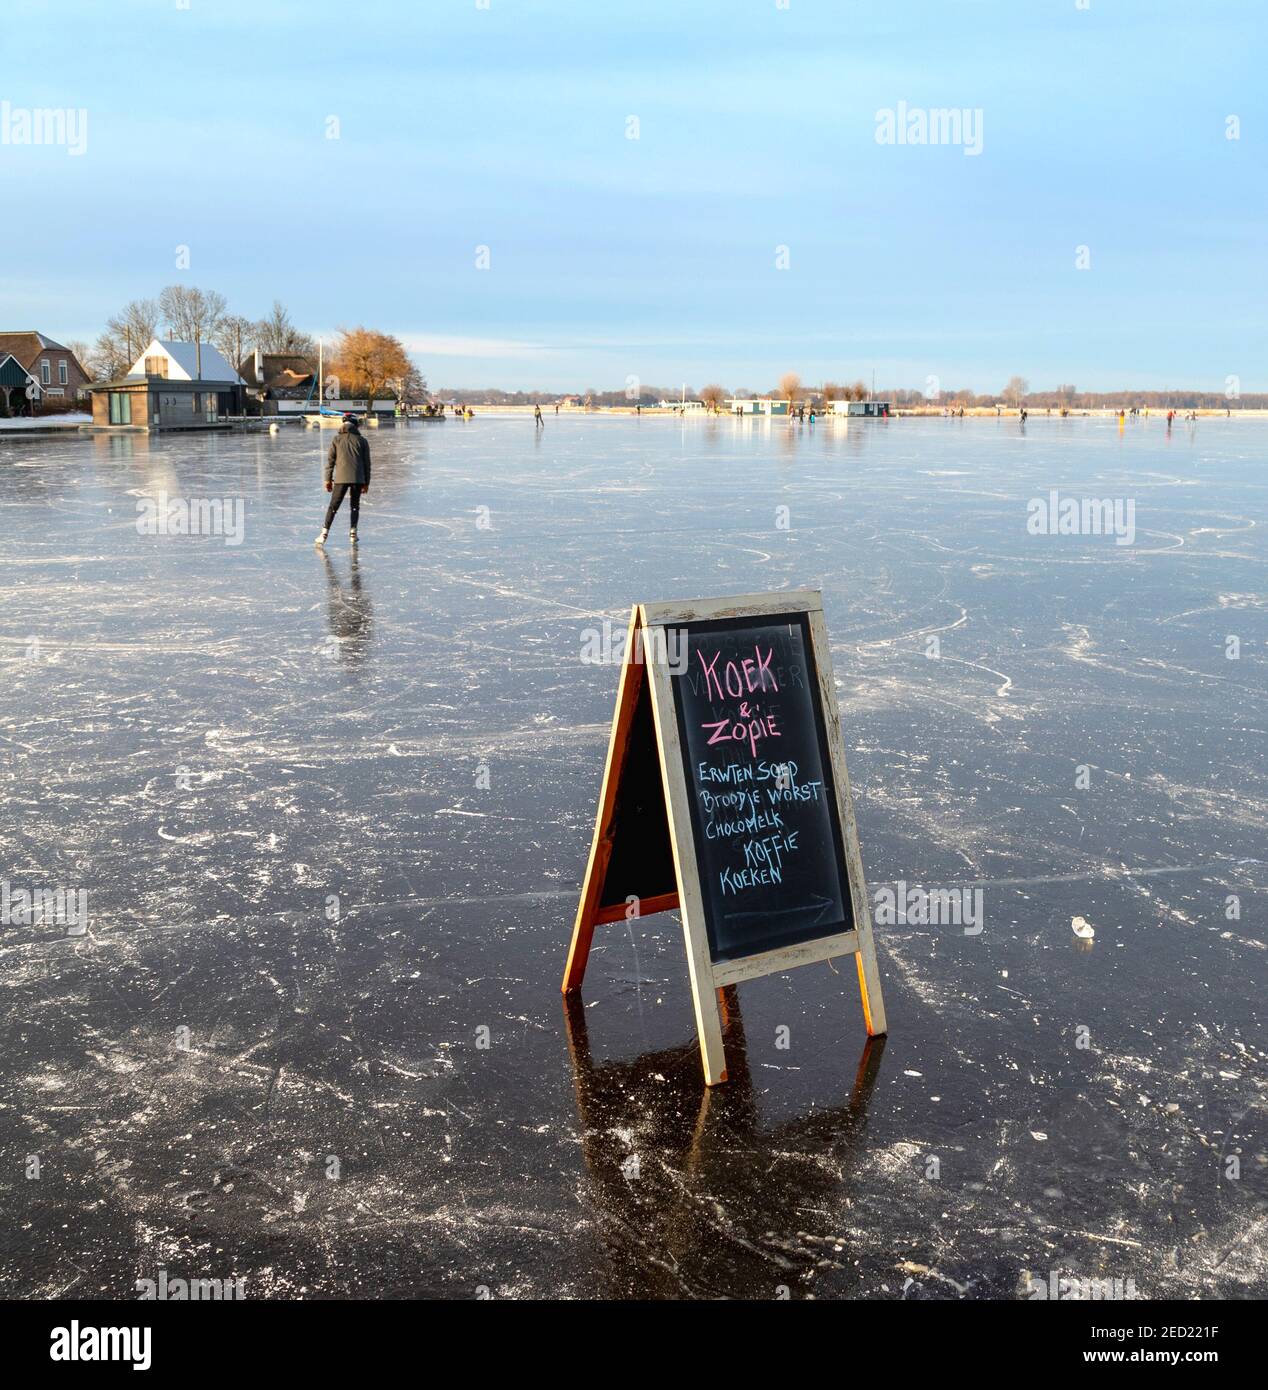 A “Koek en Zopie” sign, a typically Dutch expression, which means refreshments are for sale on Vennemeer, Warmond,South Holland, The Netherlands. Stock Photo